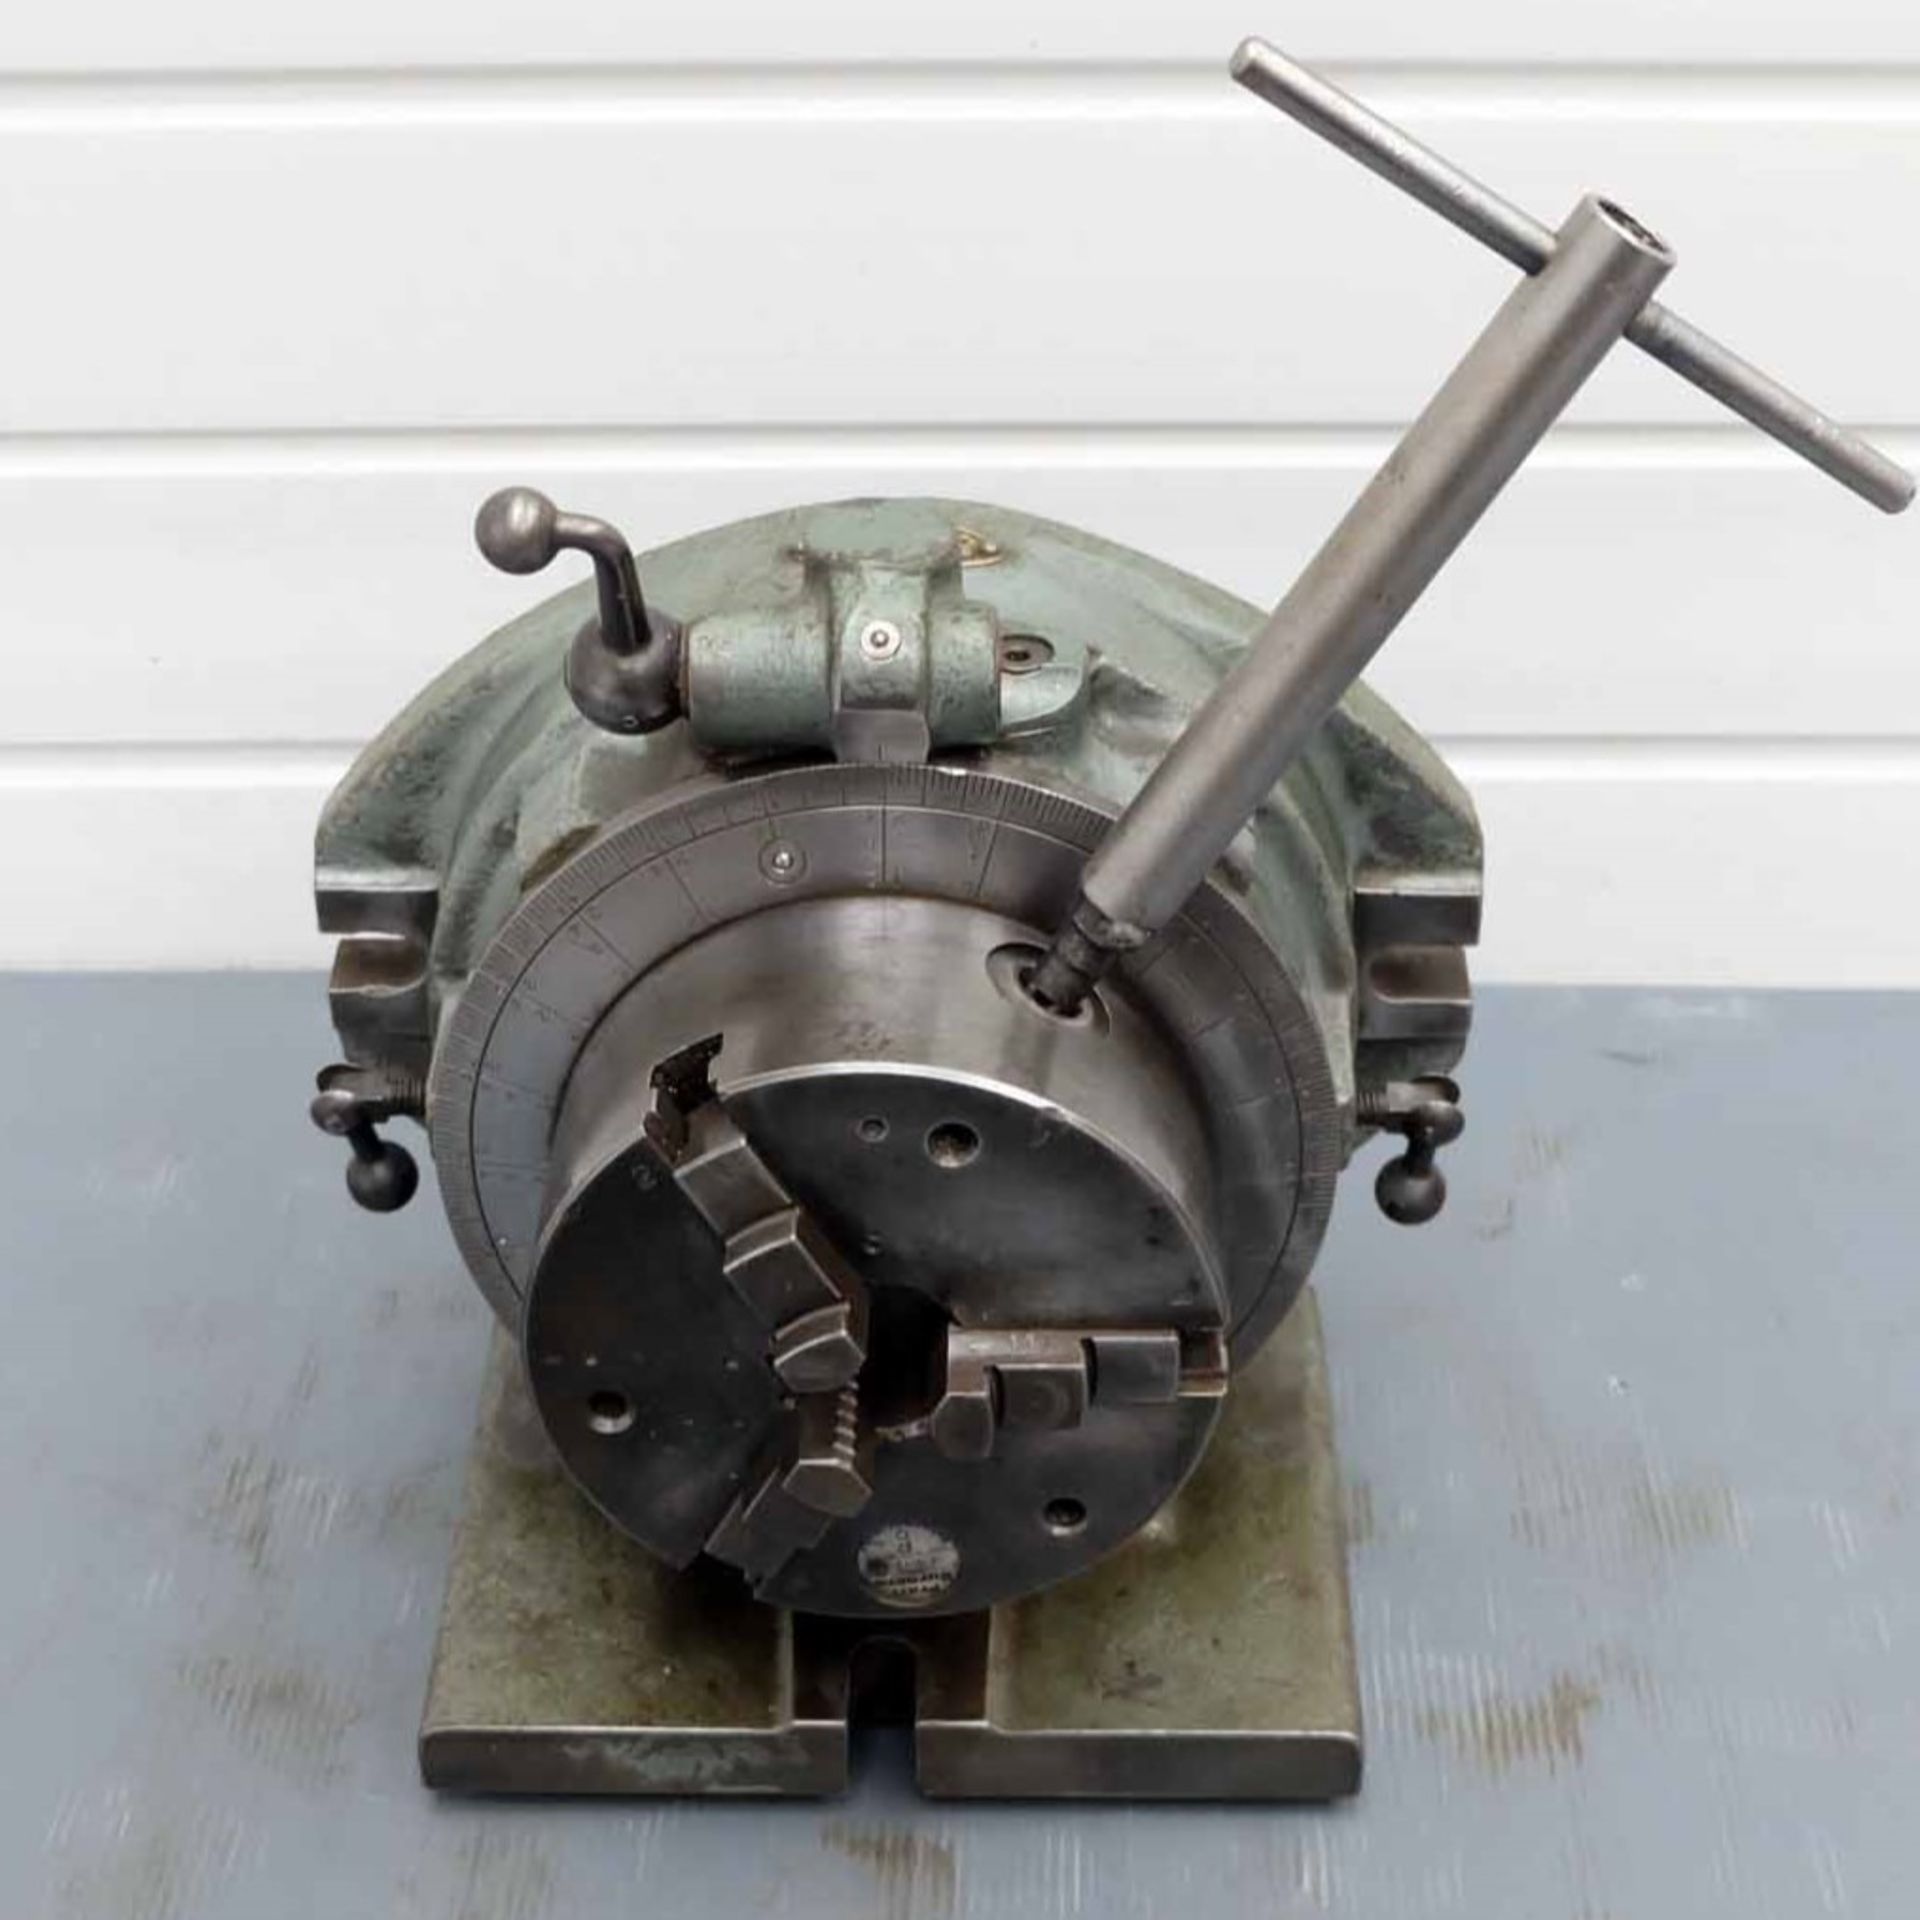 Marlco Horizontal / Vertical Indexing Head. With 5 1/4" 3 Jaw Chuck. - Image 2 of 7